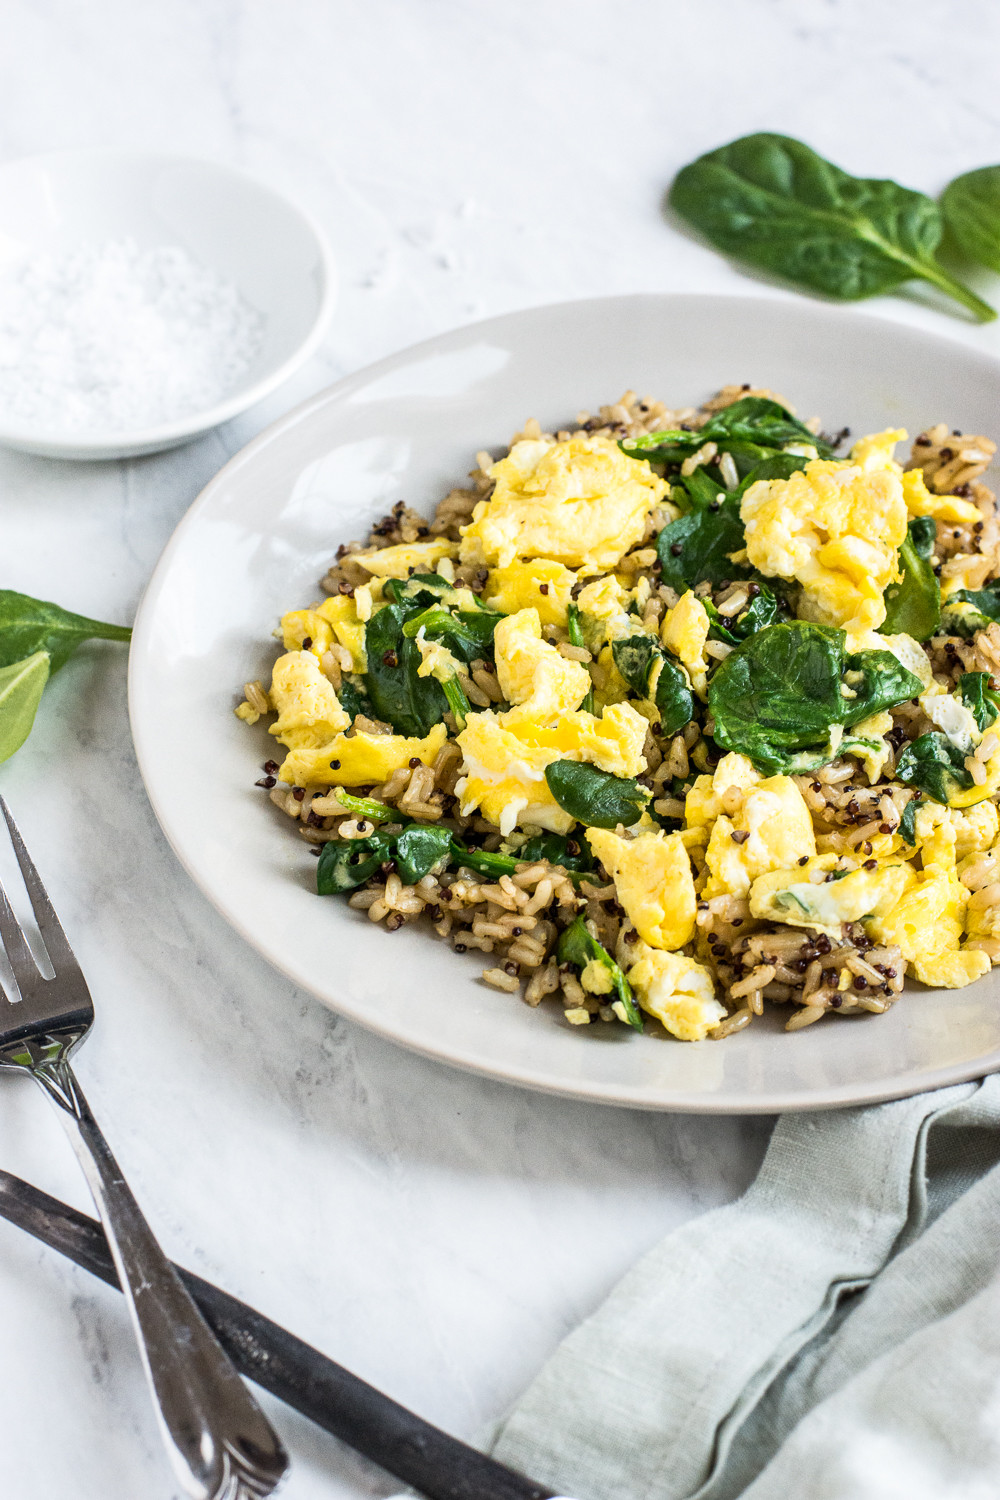 Healthy Breakfast Bowl Recipe
 Healthy Brown Rice Breakfast Bowl with Eggs and Spinach